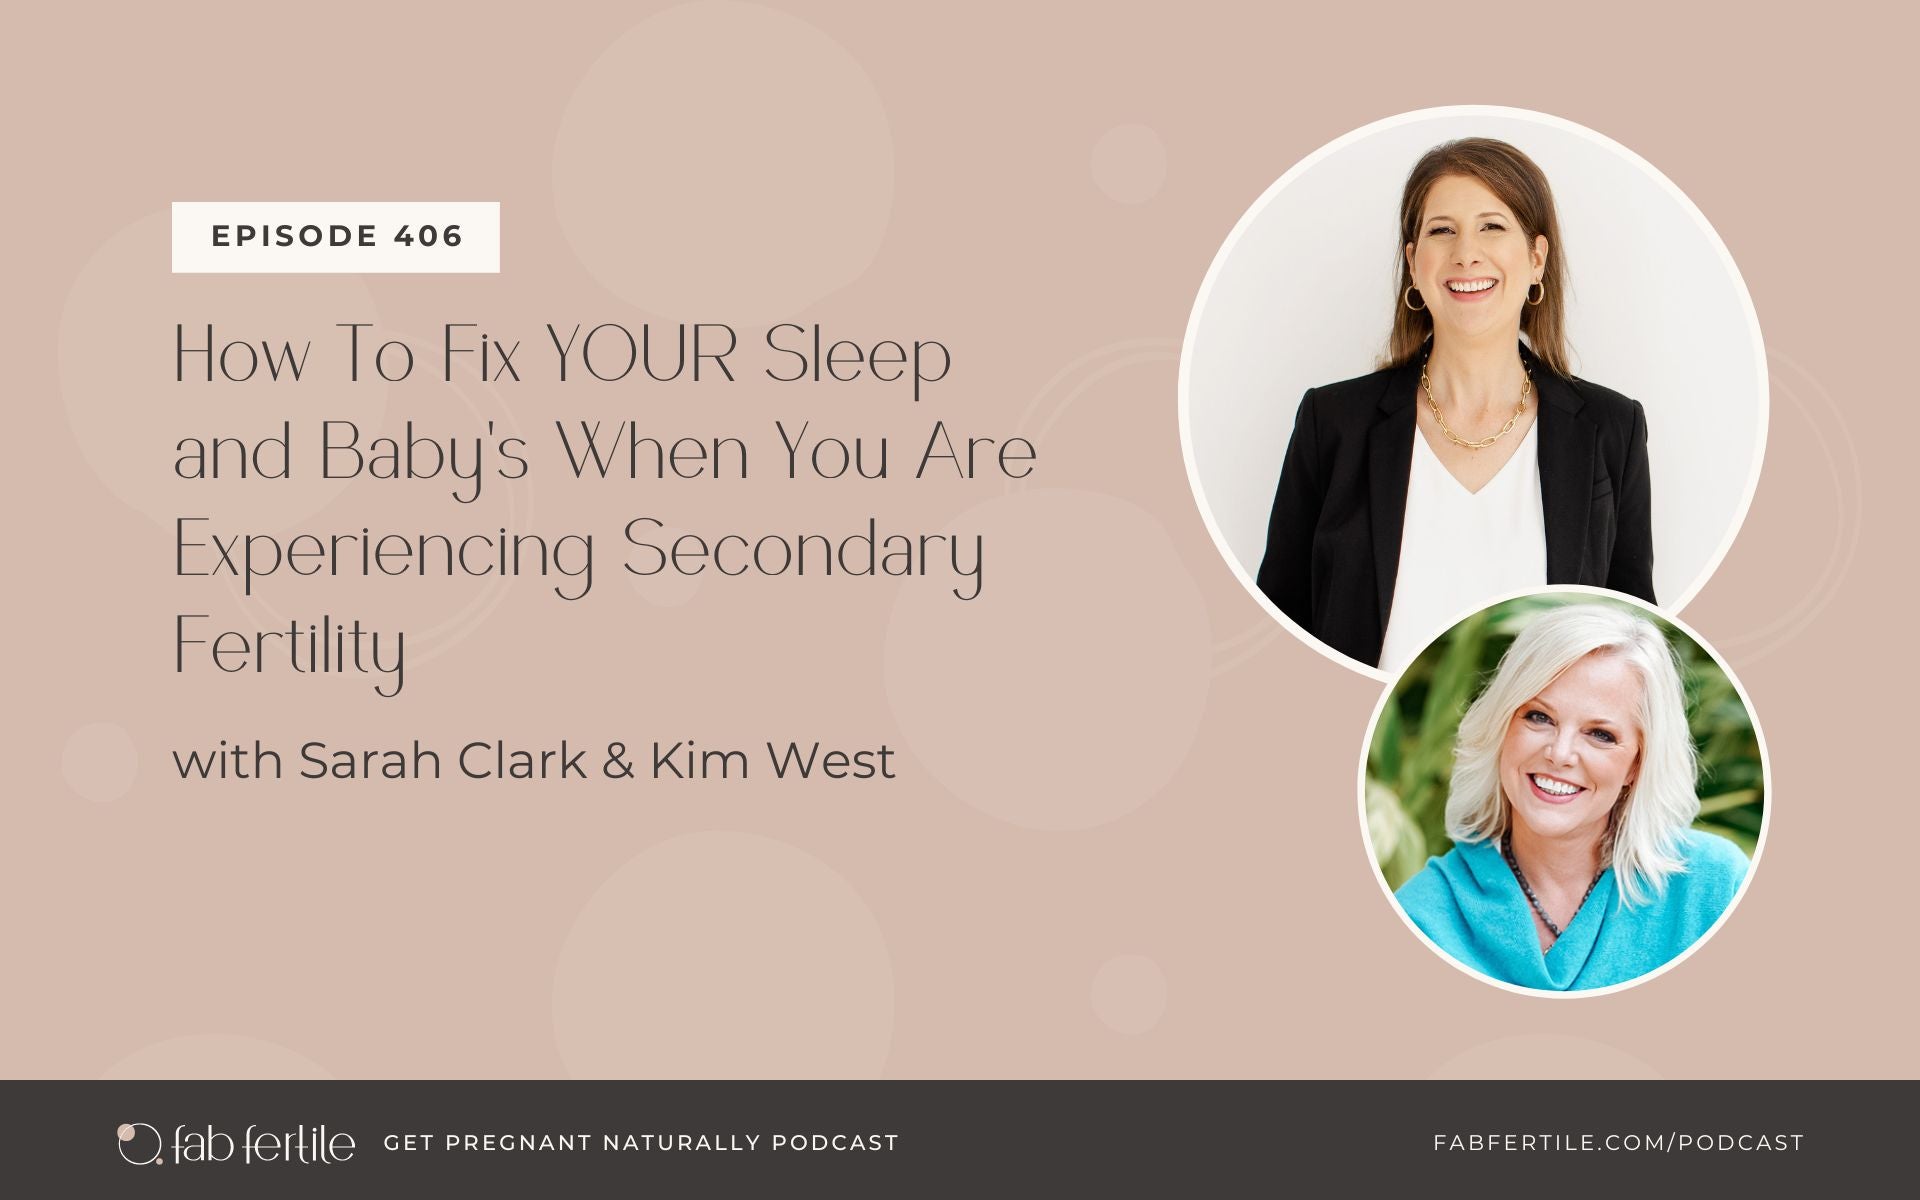 How To Fix YOUR Sleep and Baby's When You Are Experiencing Secondary Fertility